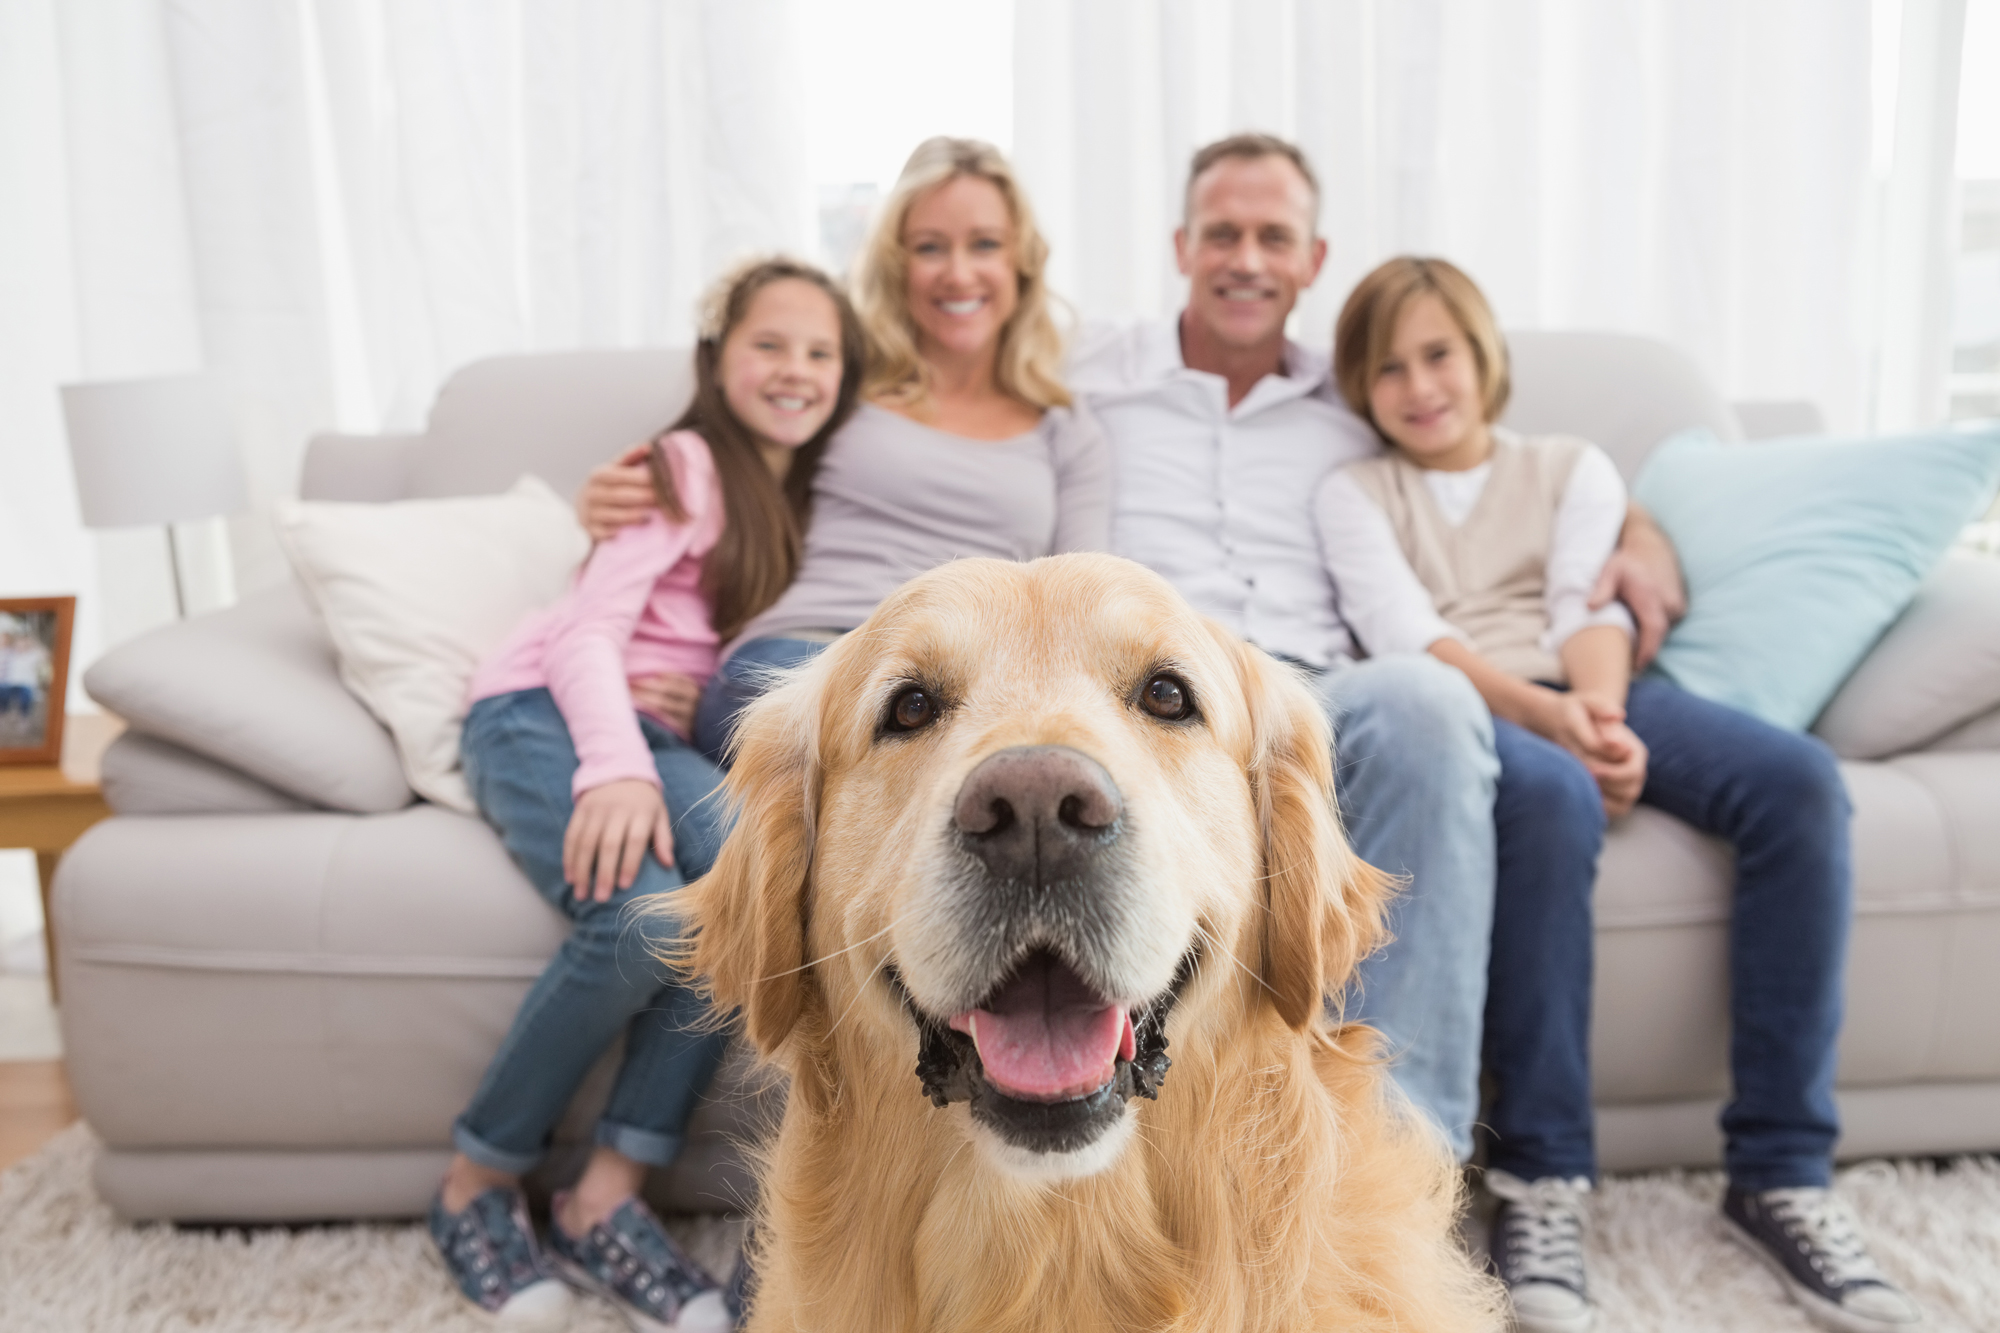 A dog sitting in-front of a family sitting on a sofa